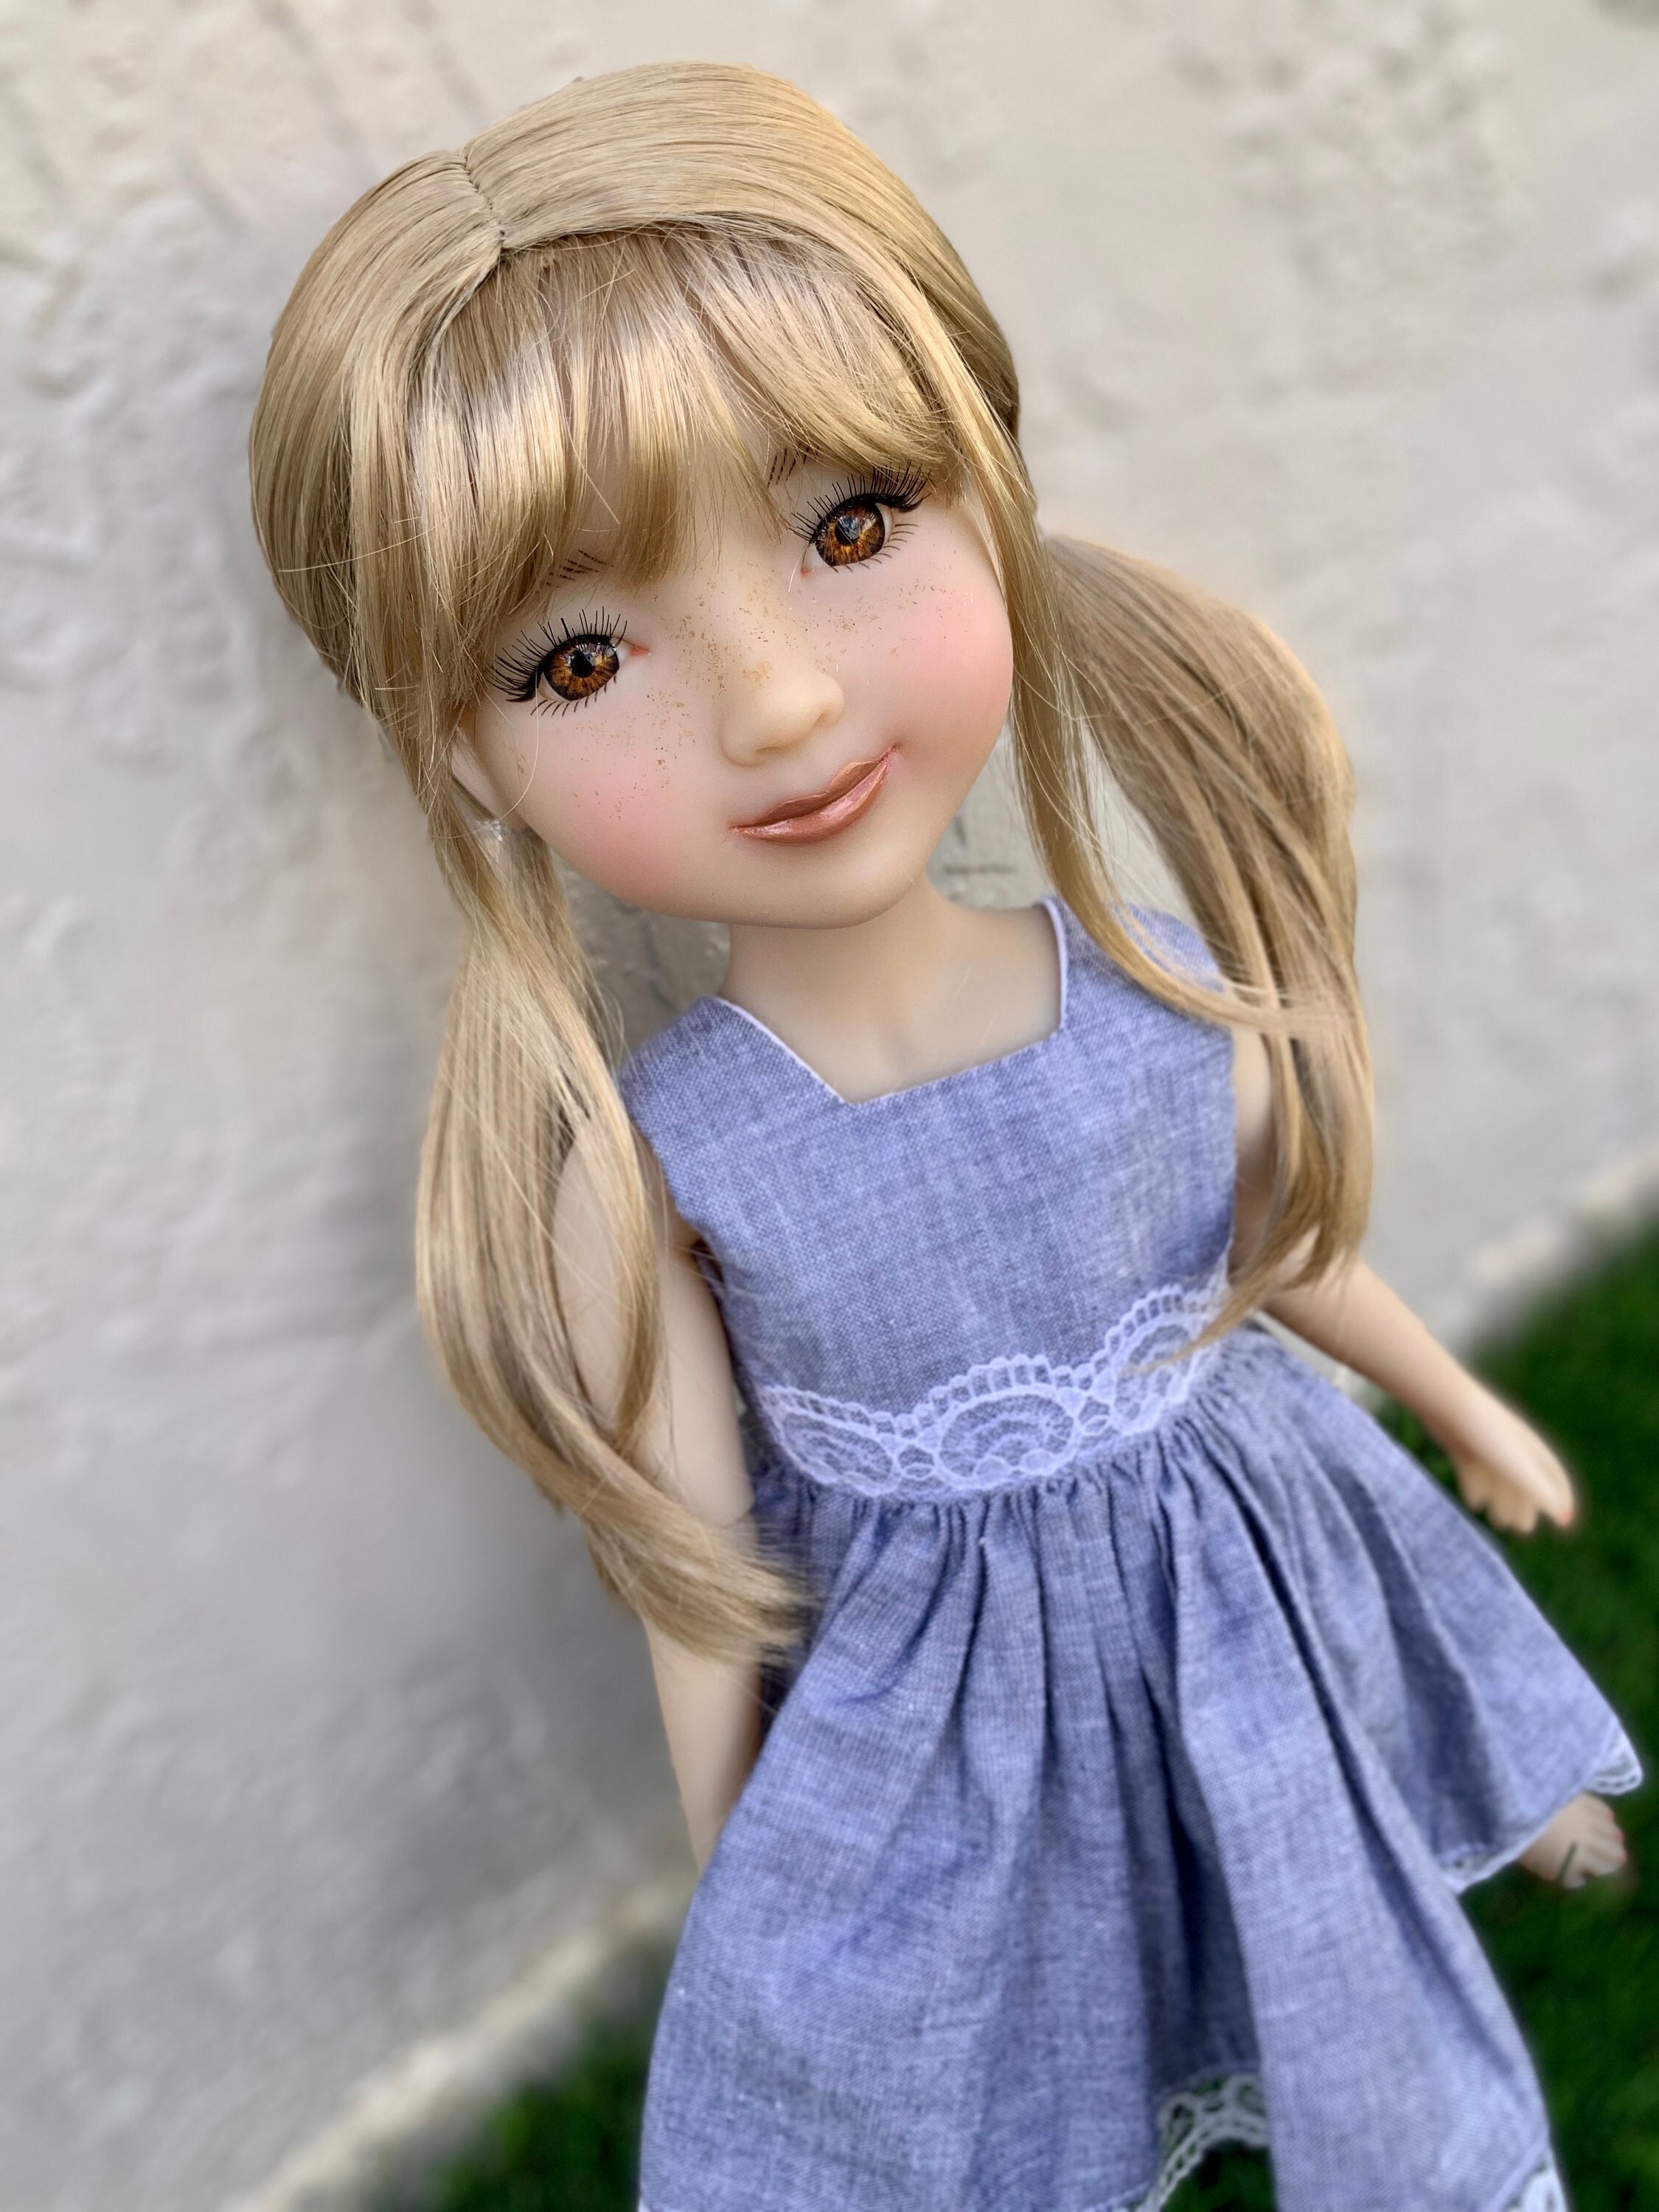 How to straighten the doll's hair - step by step tutorial - Margaret Ann